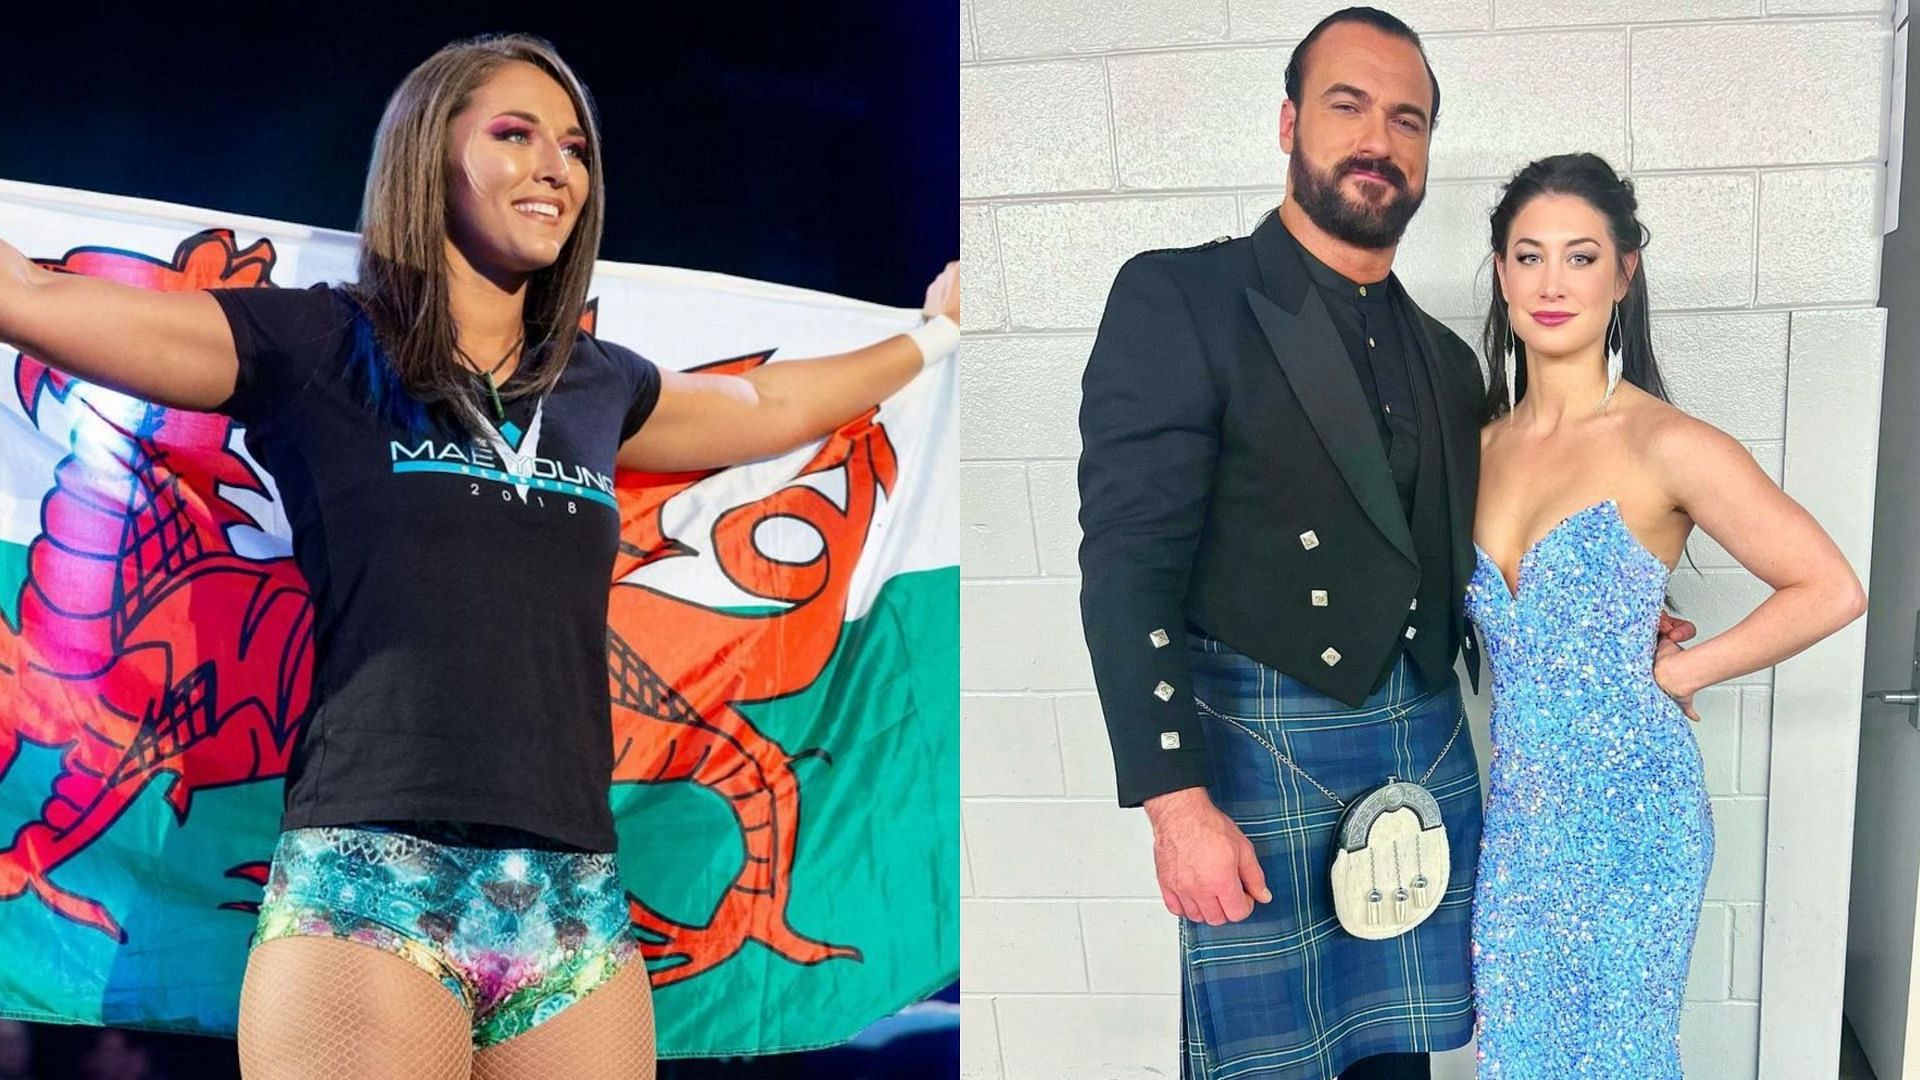 Tegan Nox (left) and Drew McIntyre with his wife (right)